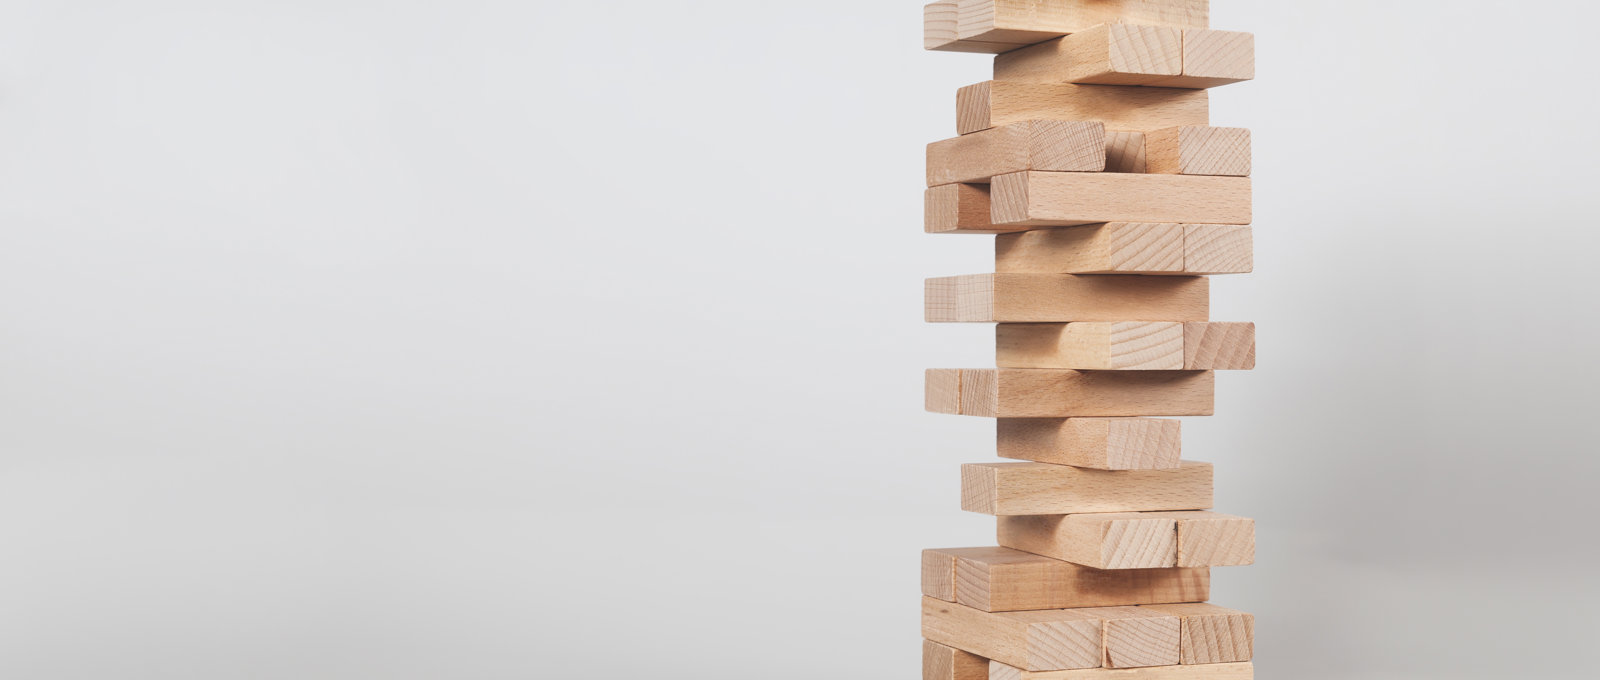 Tower of small wooden bricks